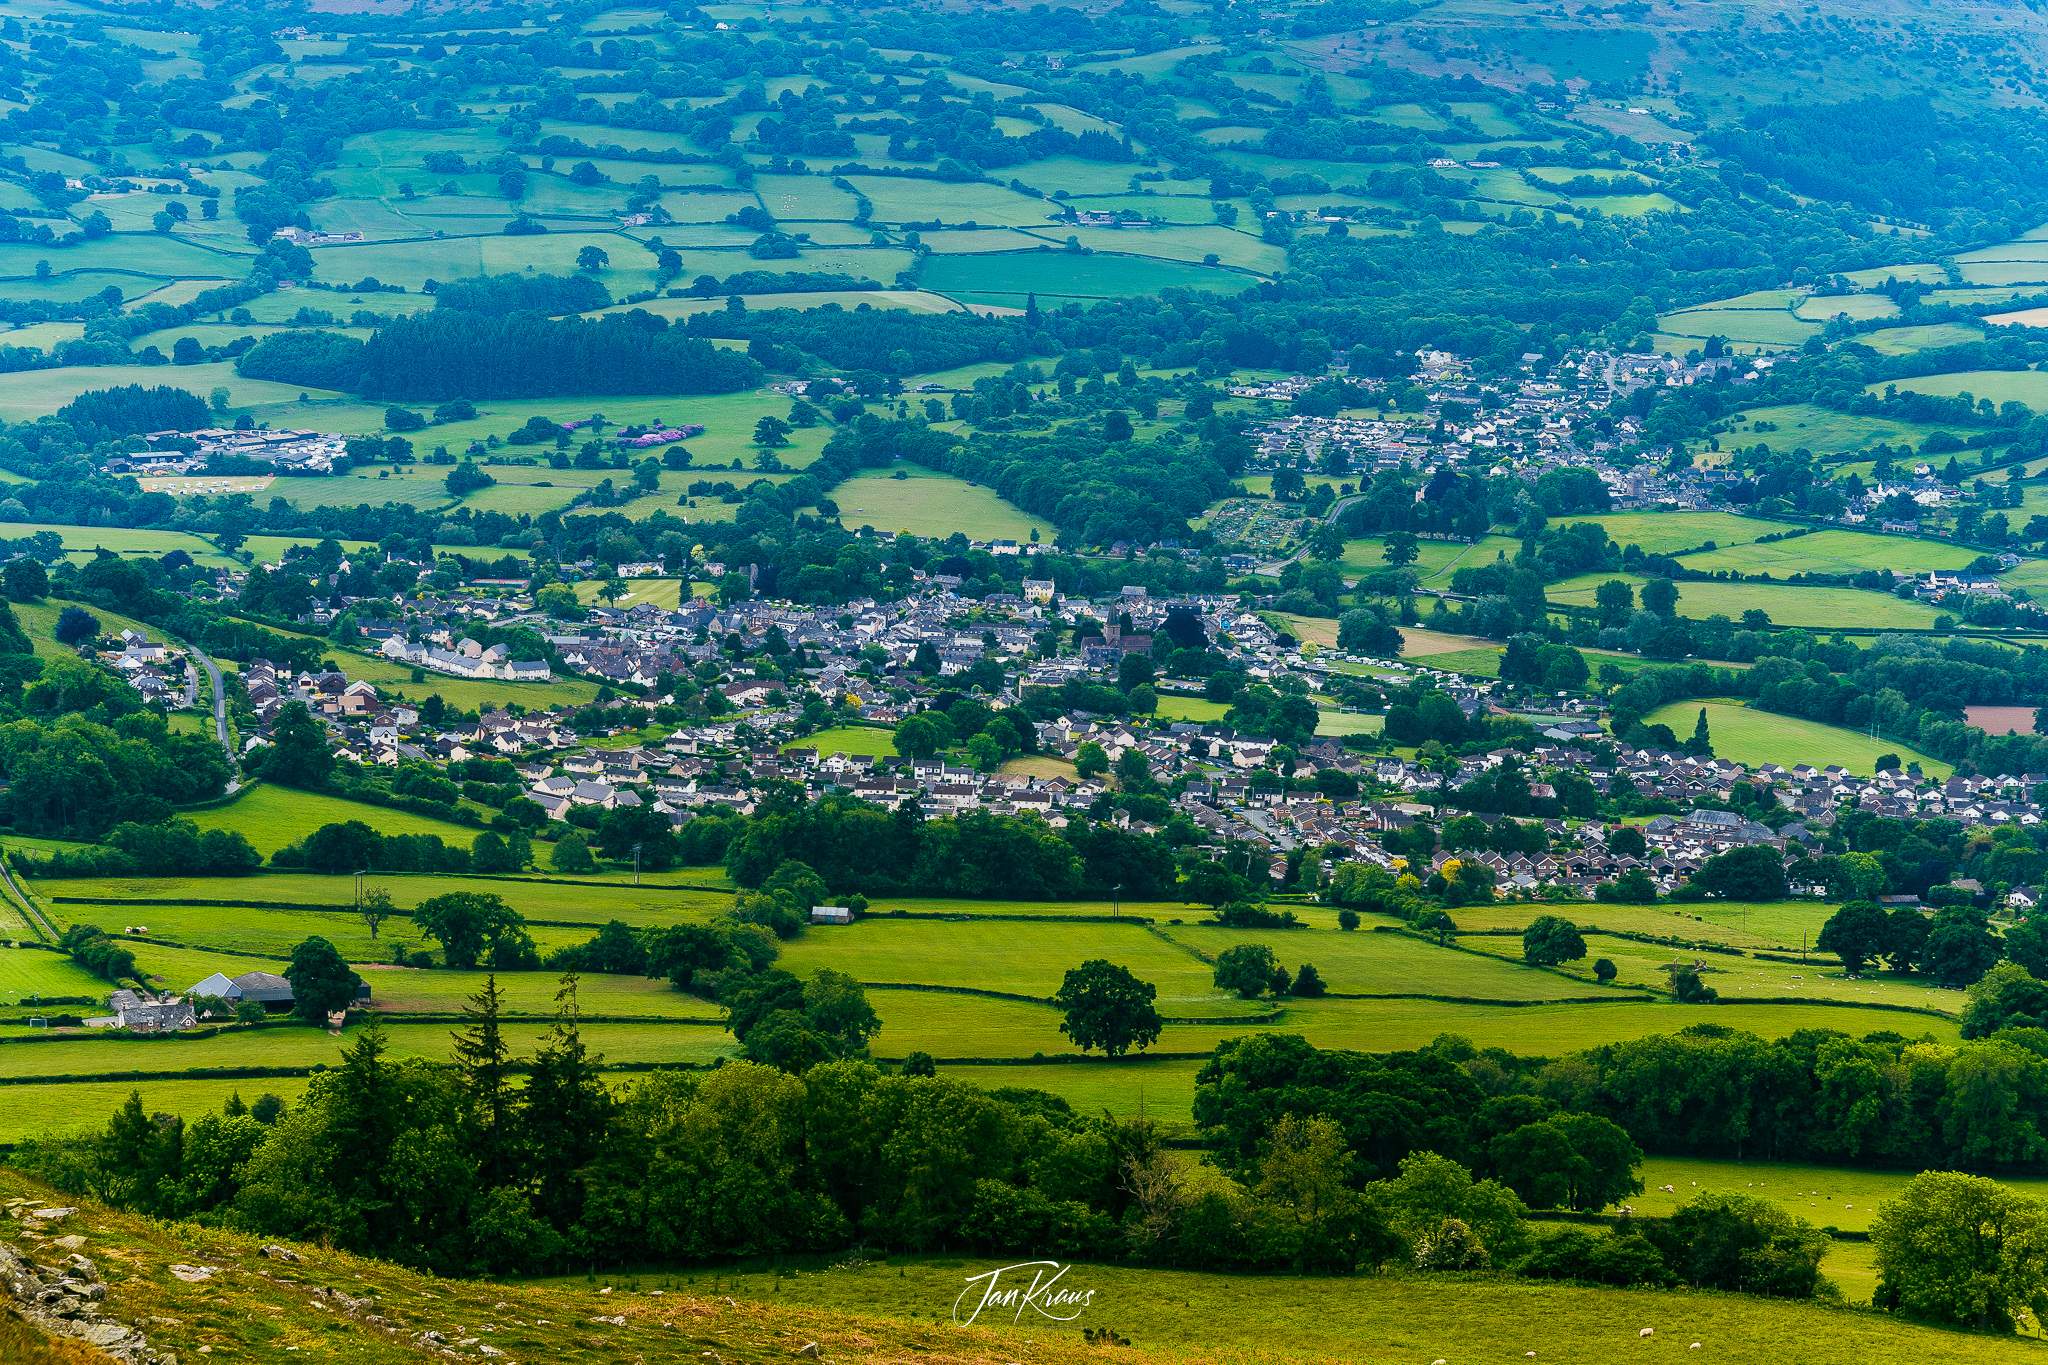 A view on Crickhowell from Table Mountain, Day 2 of the Beacons Way hike, Wales, UK